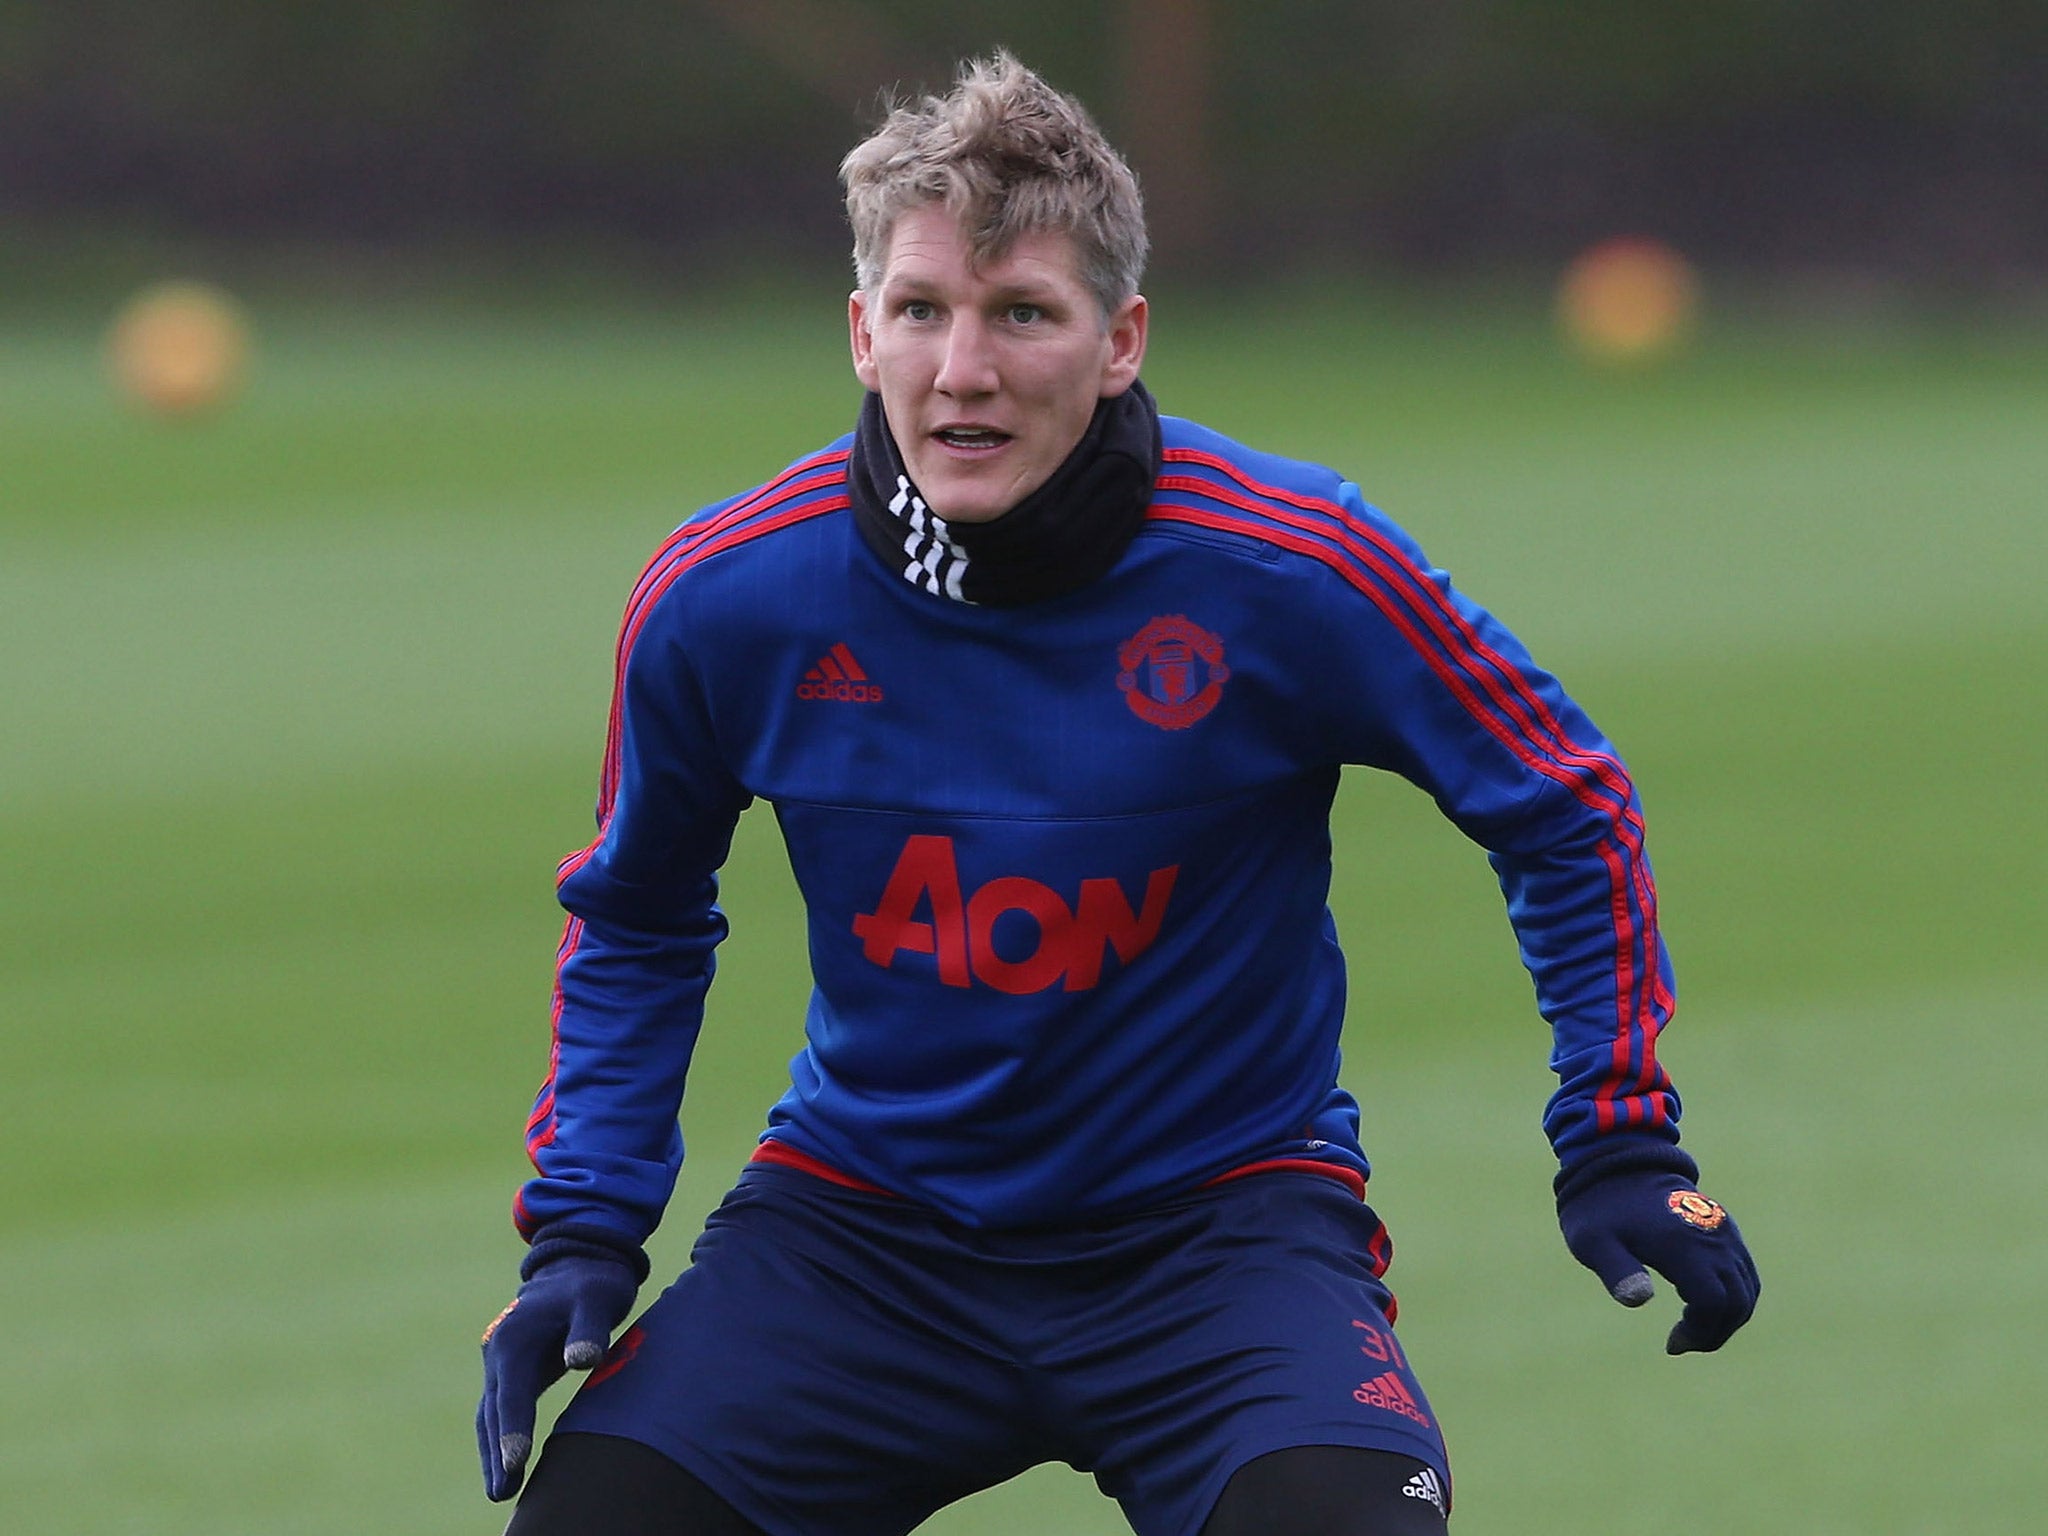 Bastian Schweinsteiger has been forced to train with the Manchester United reserves